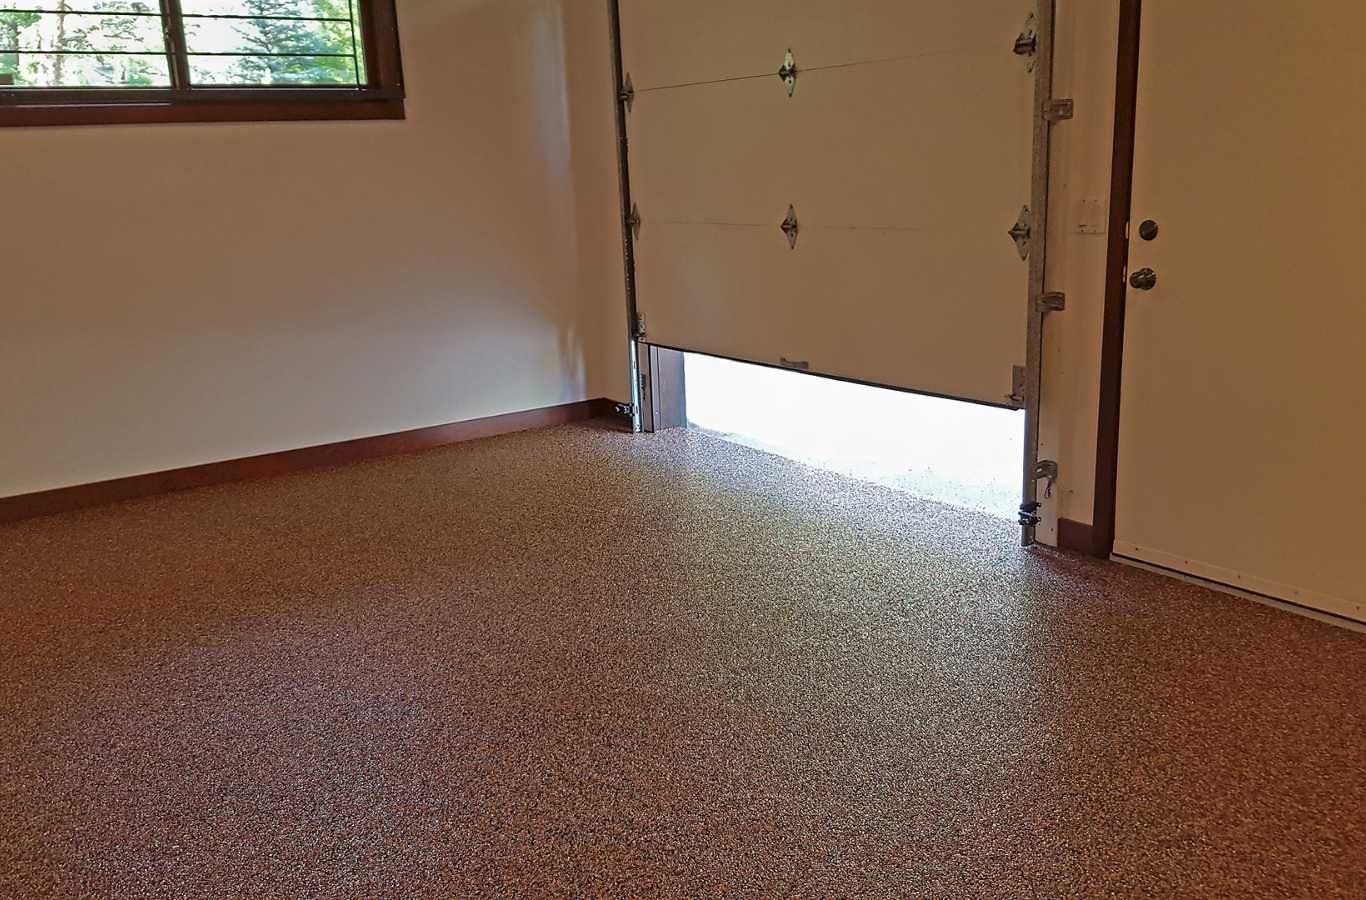 A sleek and shiny epoxy-coated garage floor installed by Expert Epoxy Solutions in a Leland, NC home, reflecting the professional quality and durability of the flooring.